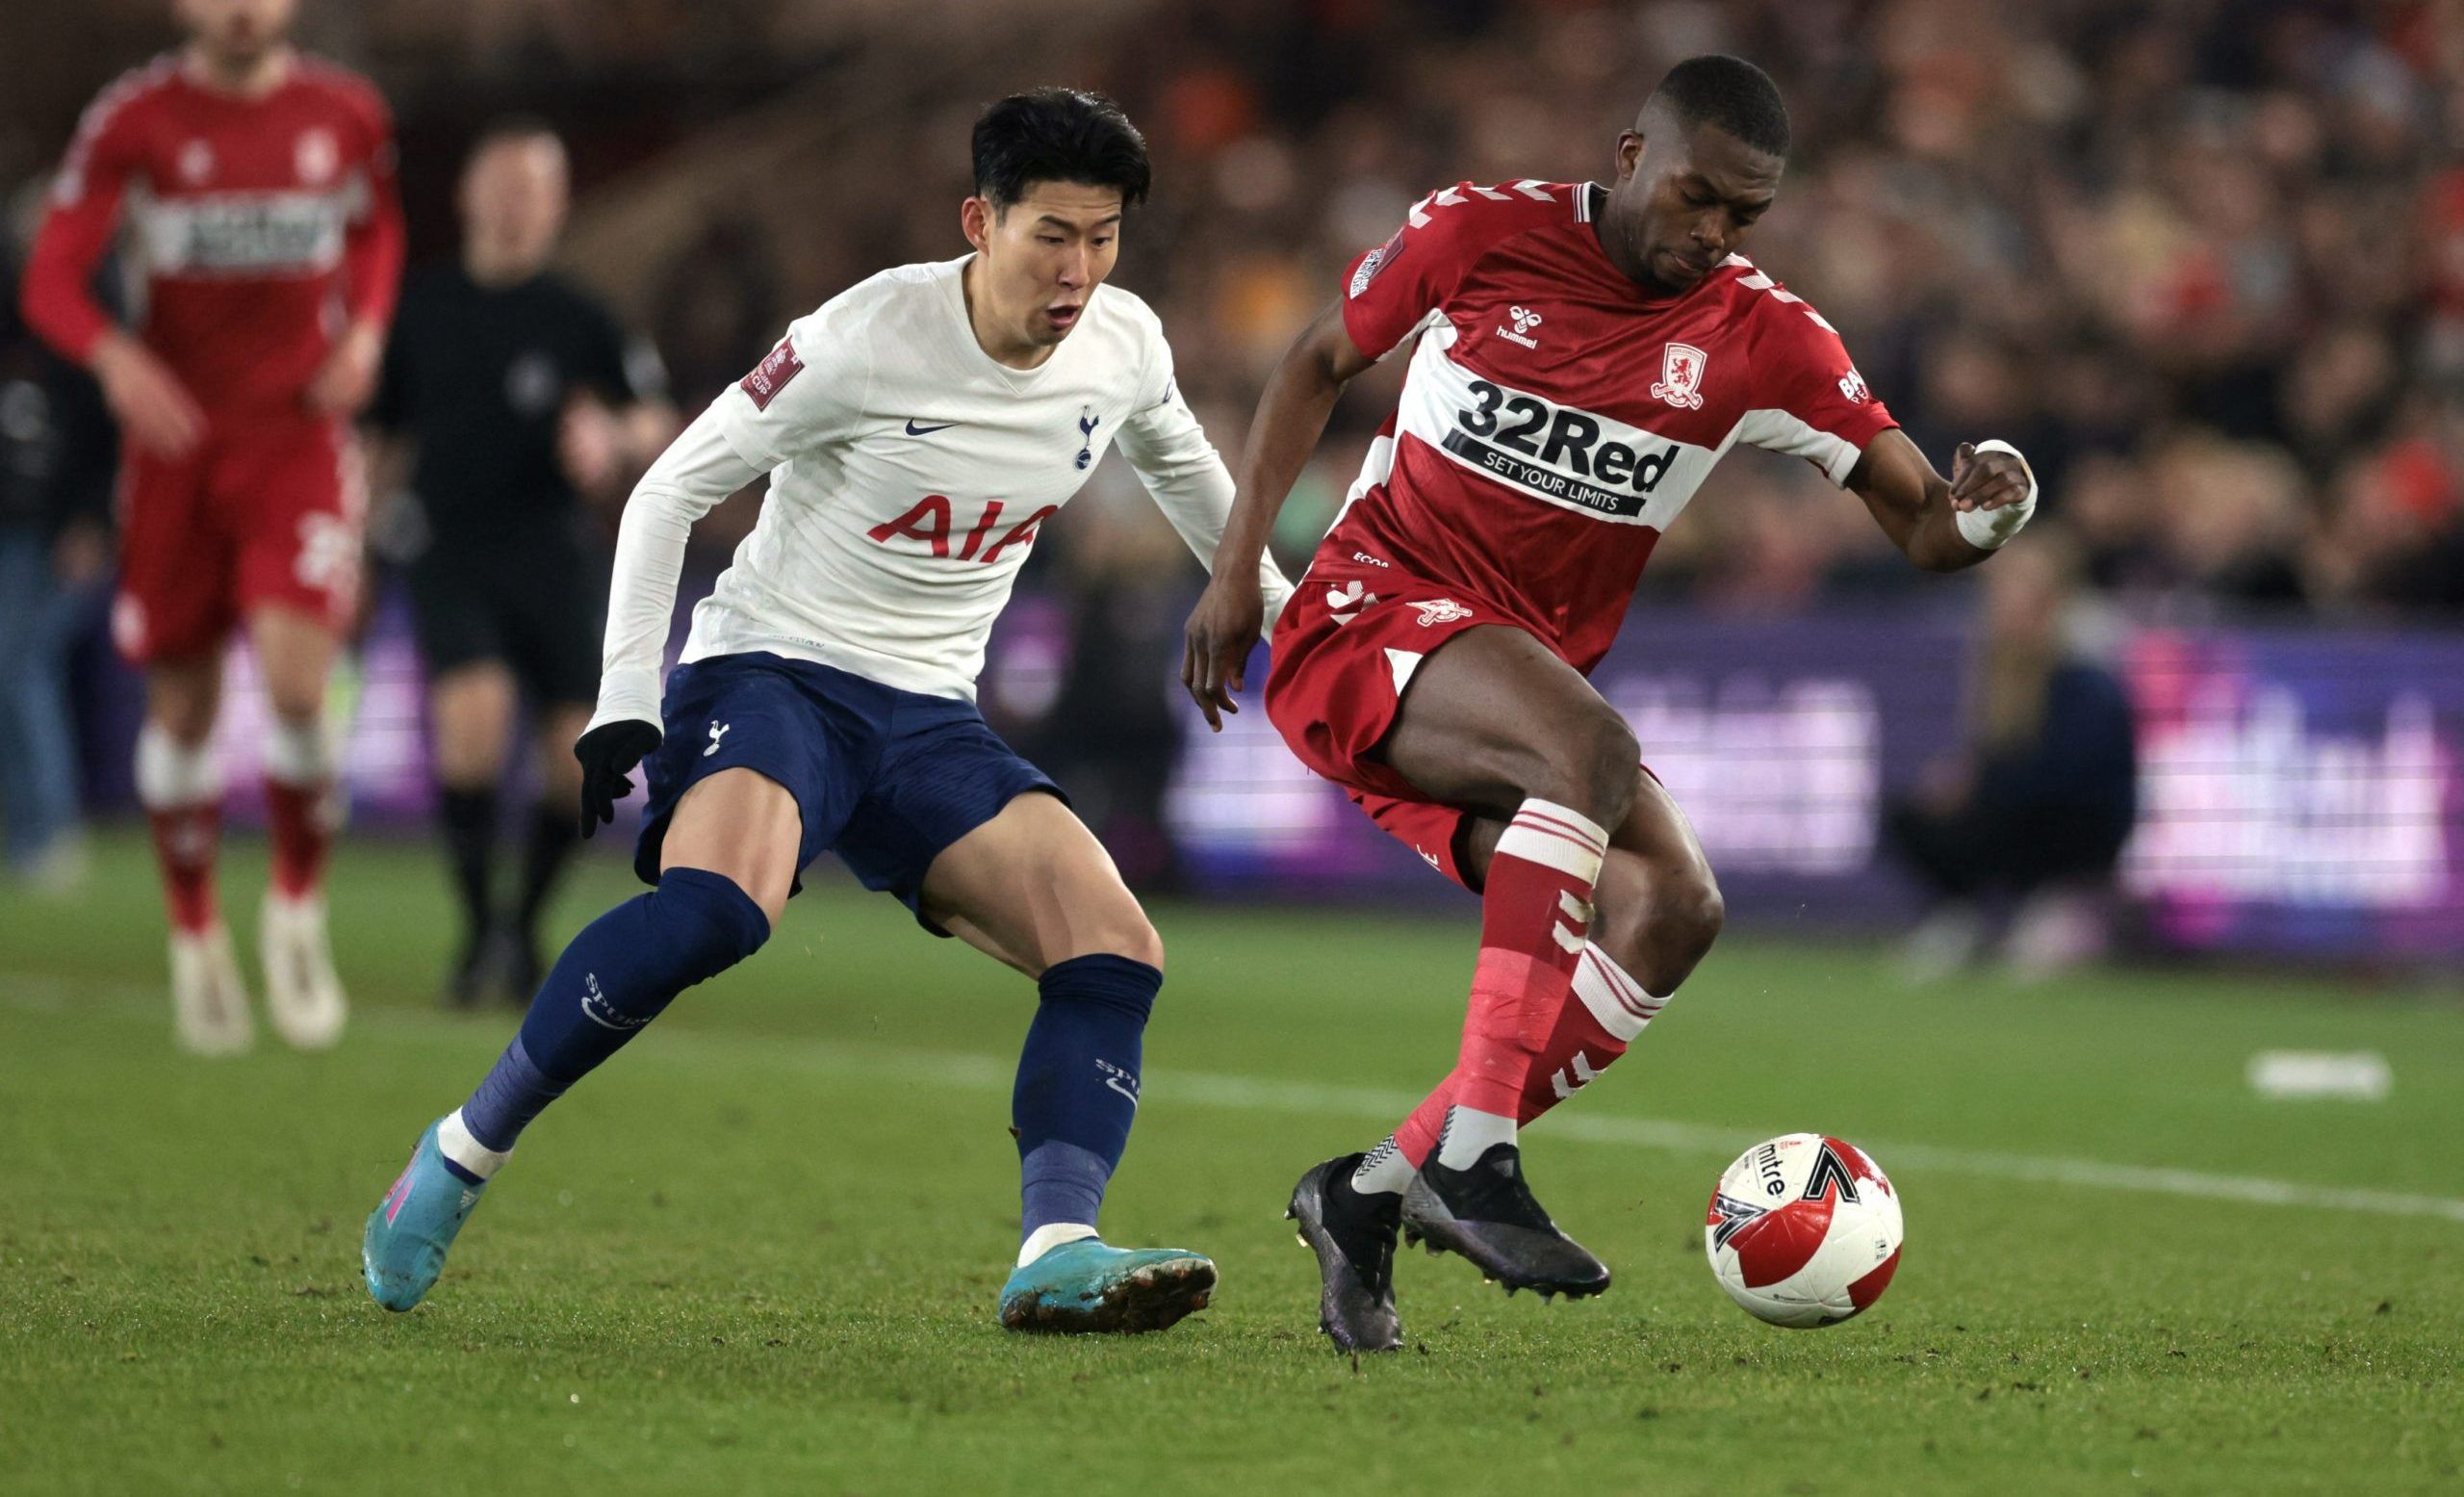 Soccer Football - FA Cup Fifth Round - Middlesbrough v Tottenham Hotspur - Riverside Stadium, Middlesbrough, Britain - March 1, 2022 Middlesbrough's Anfernee Dijksteel in action with Tottenham Hotspur's Son Heung-min Action Images via Reuters/Lee Smith